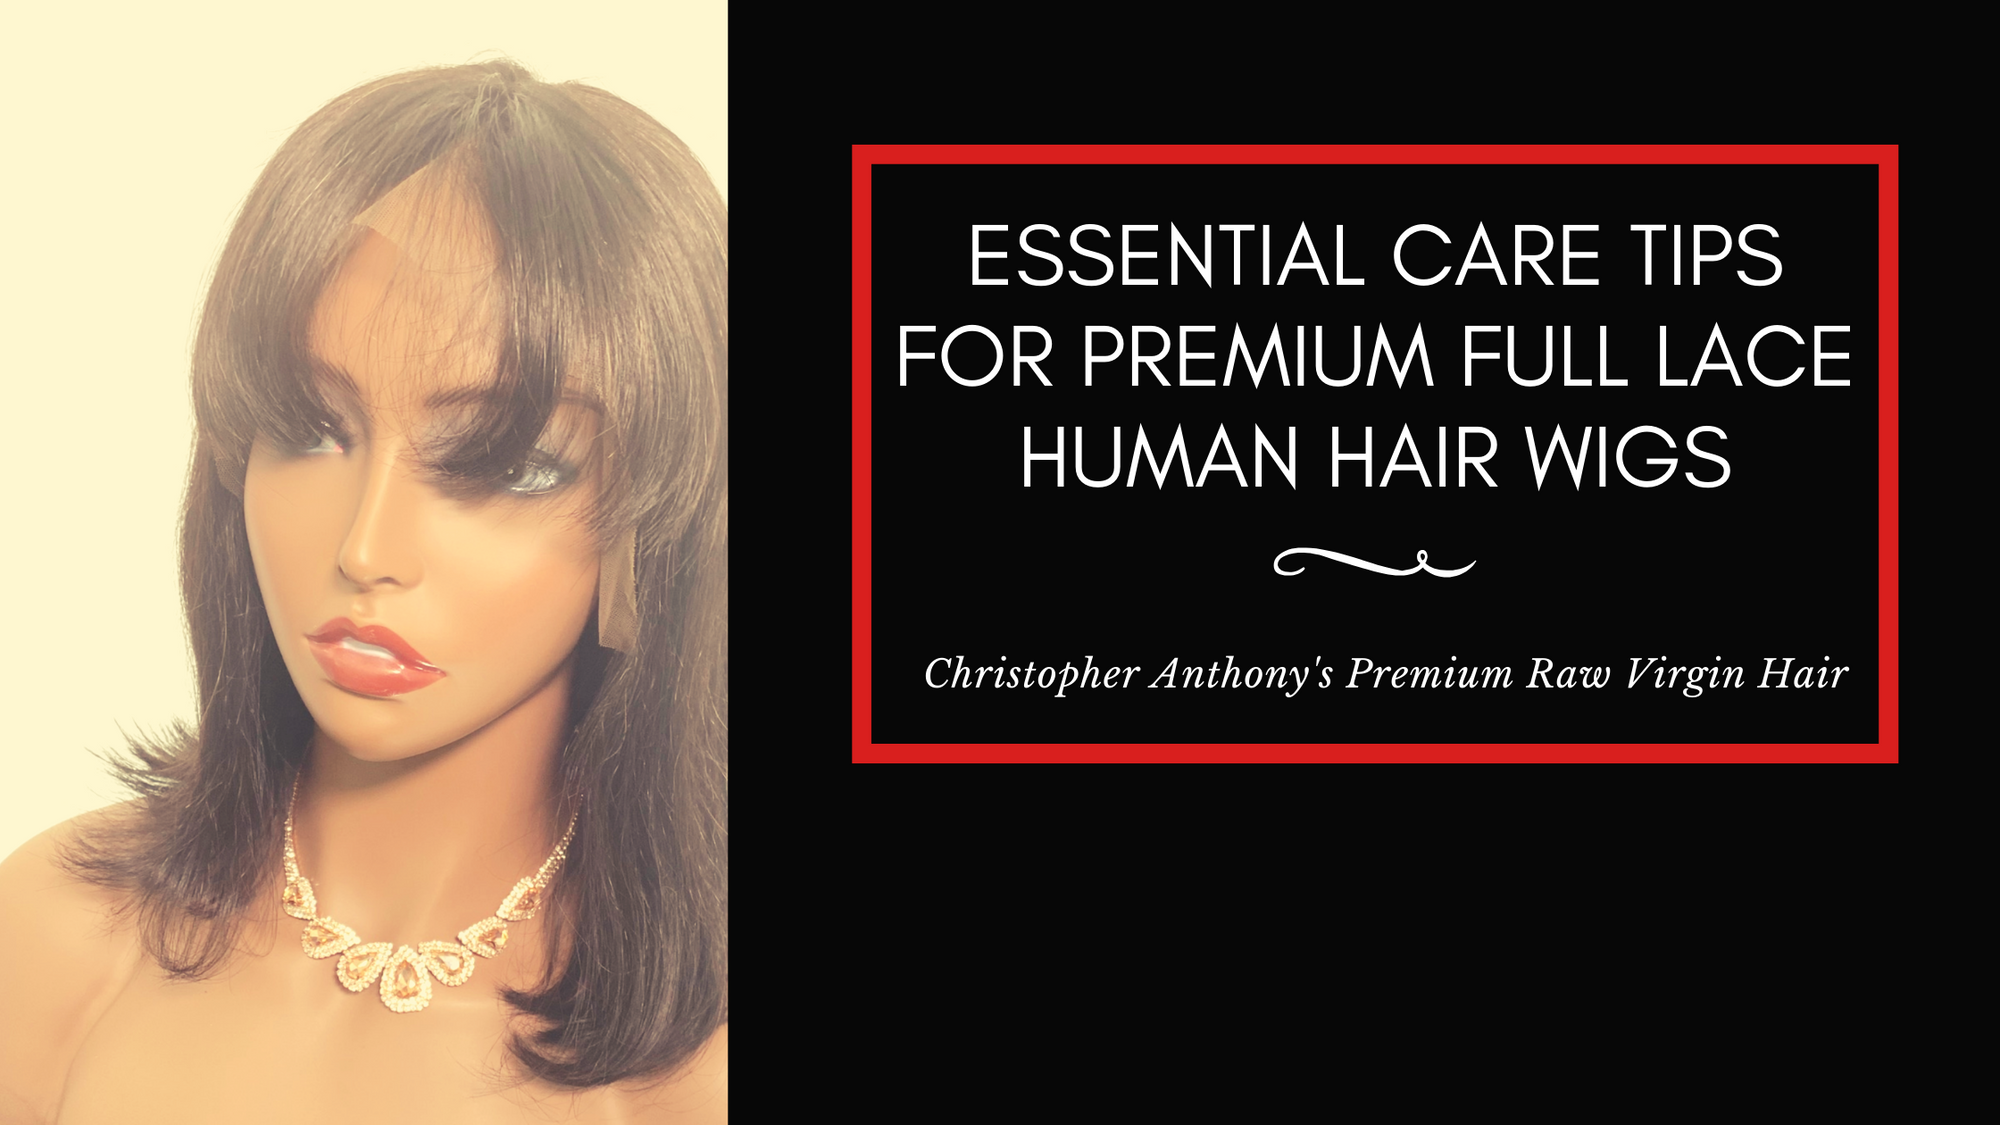 Essential Care Tips for Premium Full Lace Human Hair Wigs